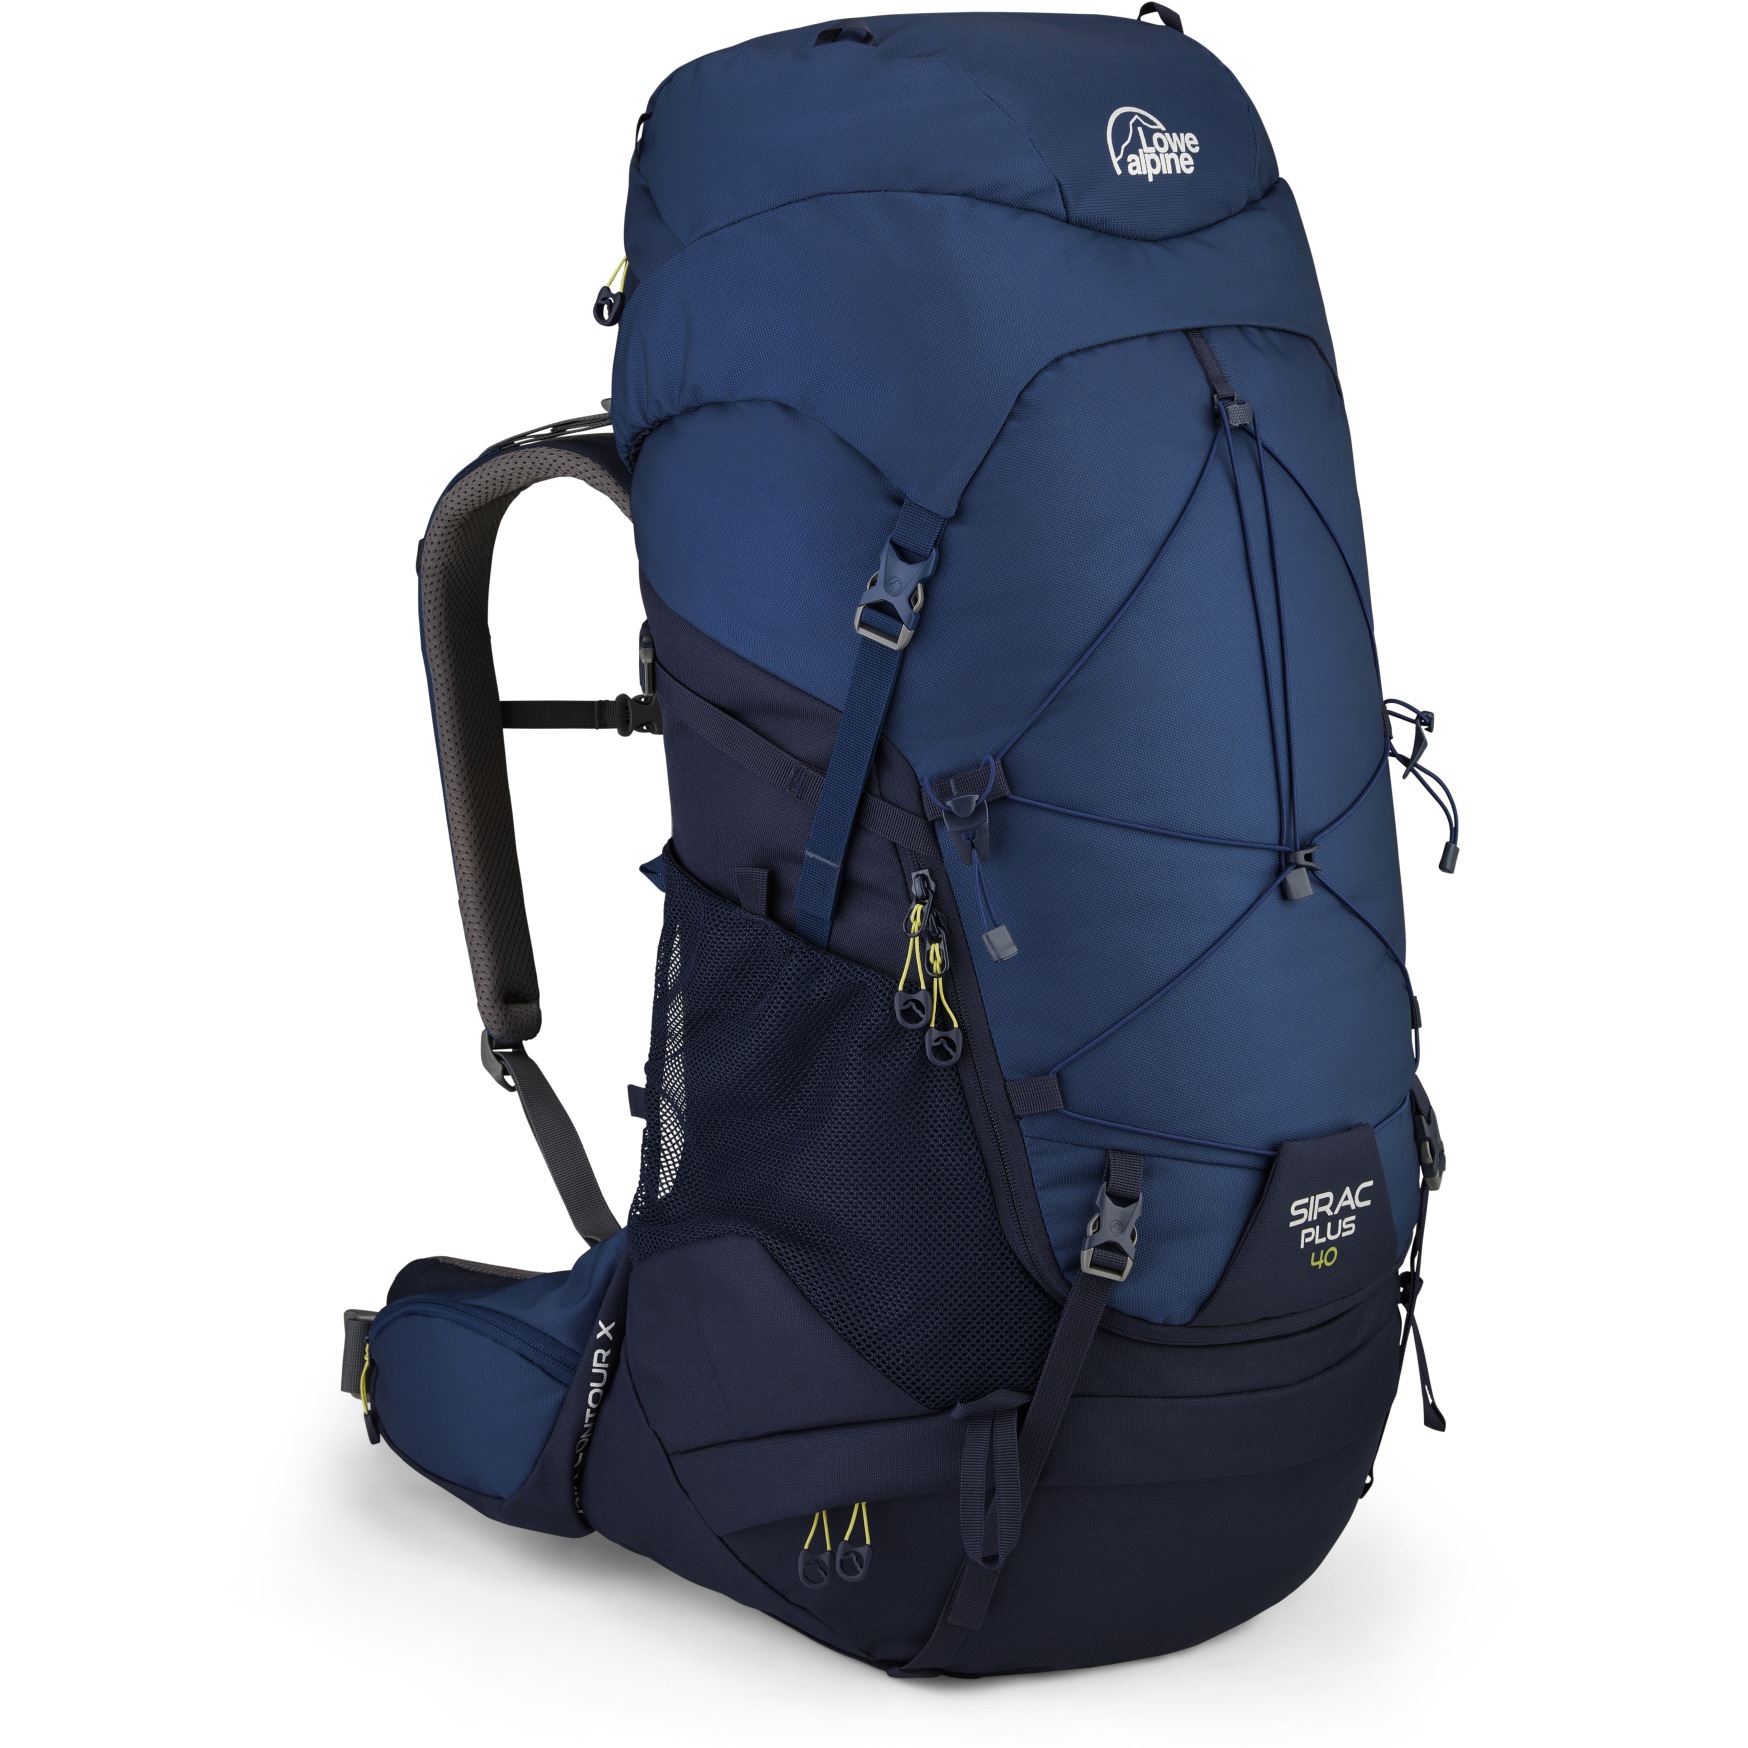 Picture of Lowe Alpine Sirac Plus 40L Backpack - M/L - Deep Ink/Ink